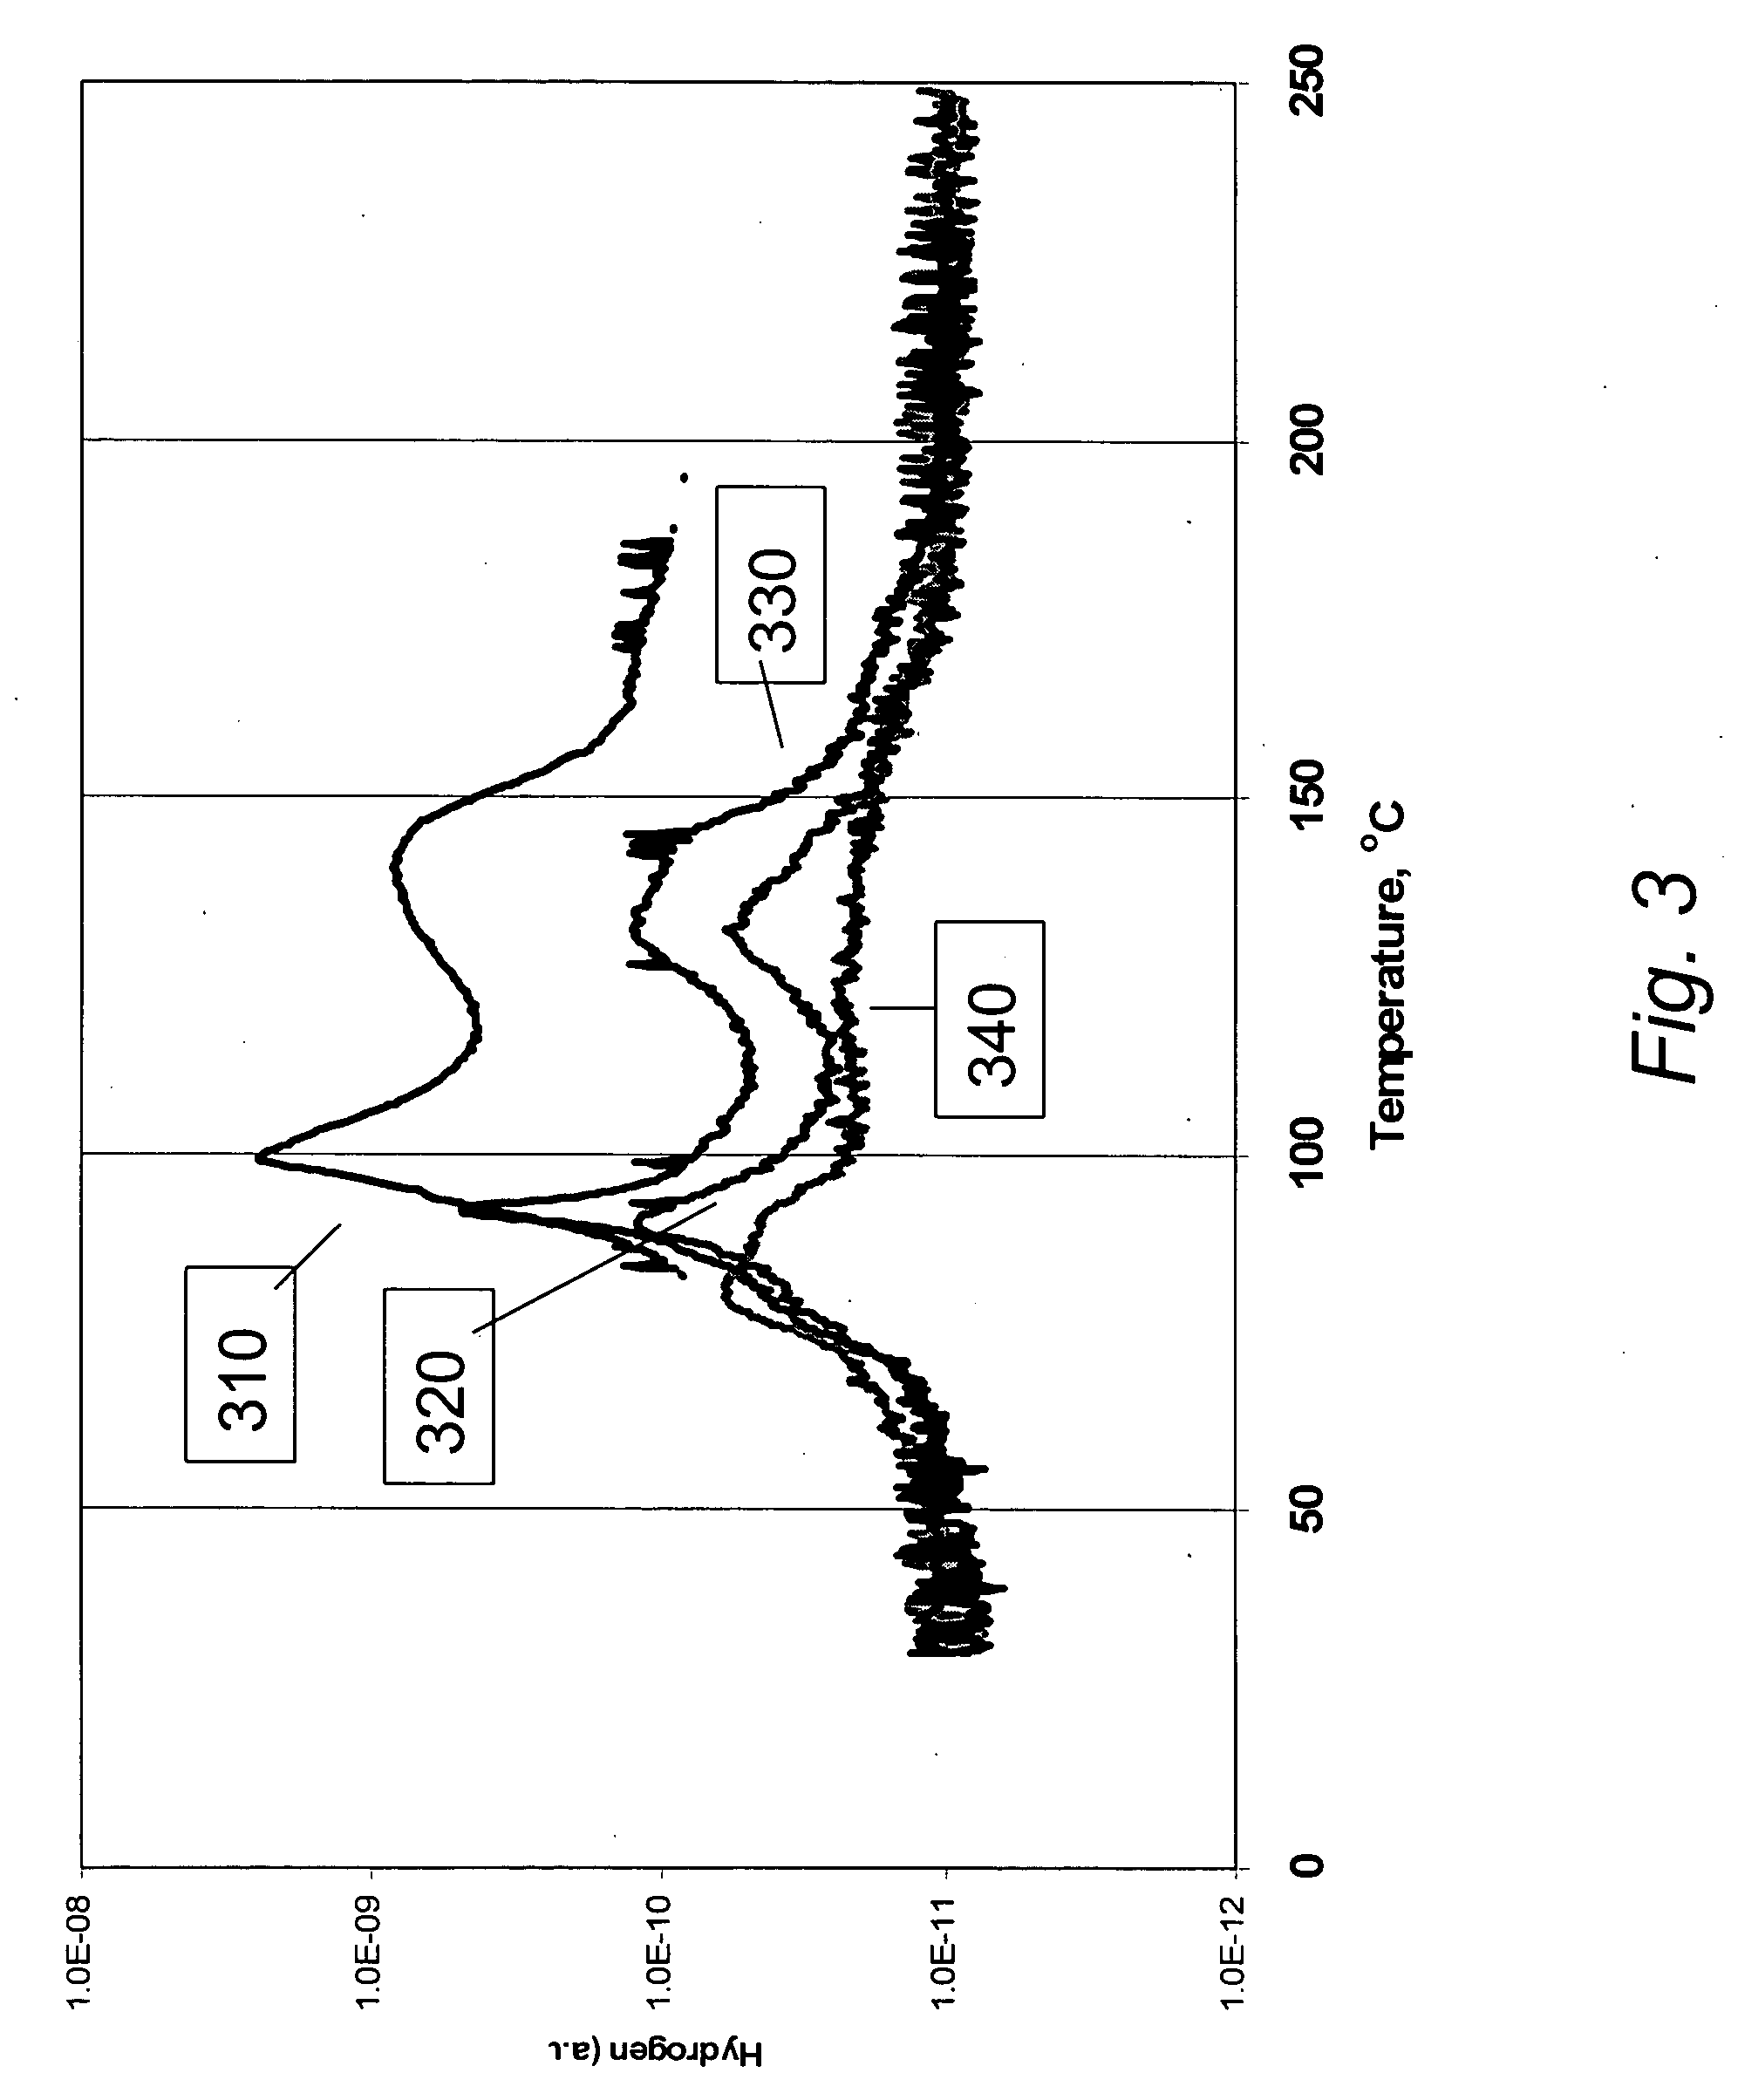 Materials for hydrogen storage and methods for preparing and using same